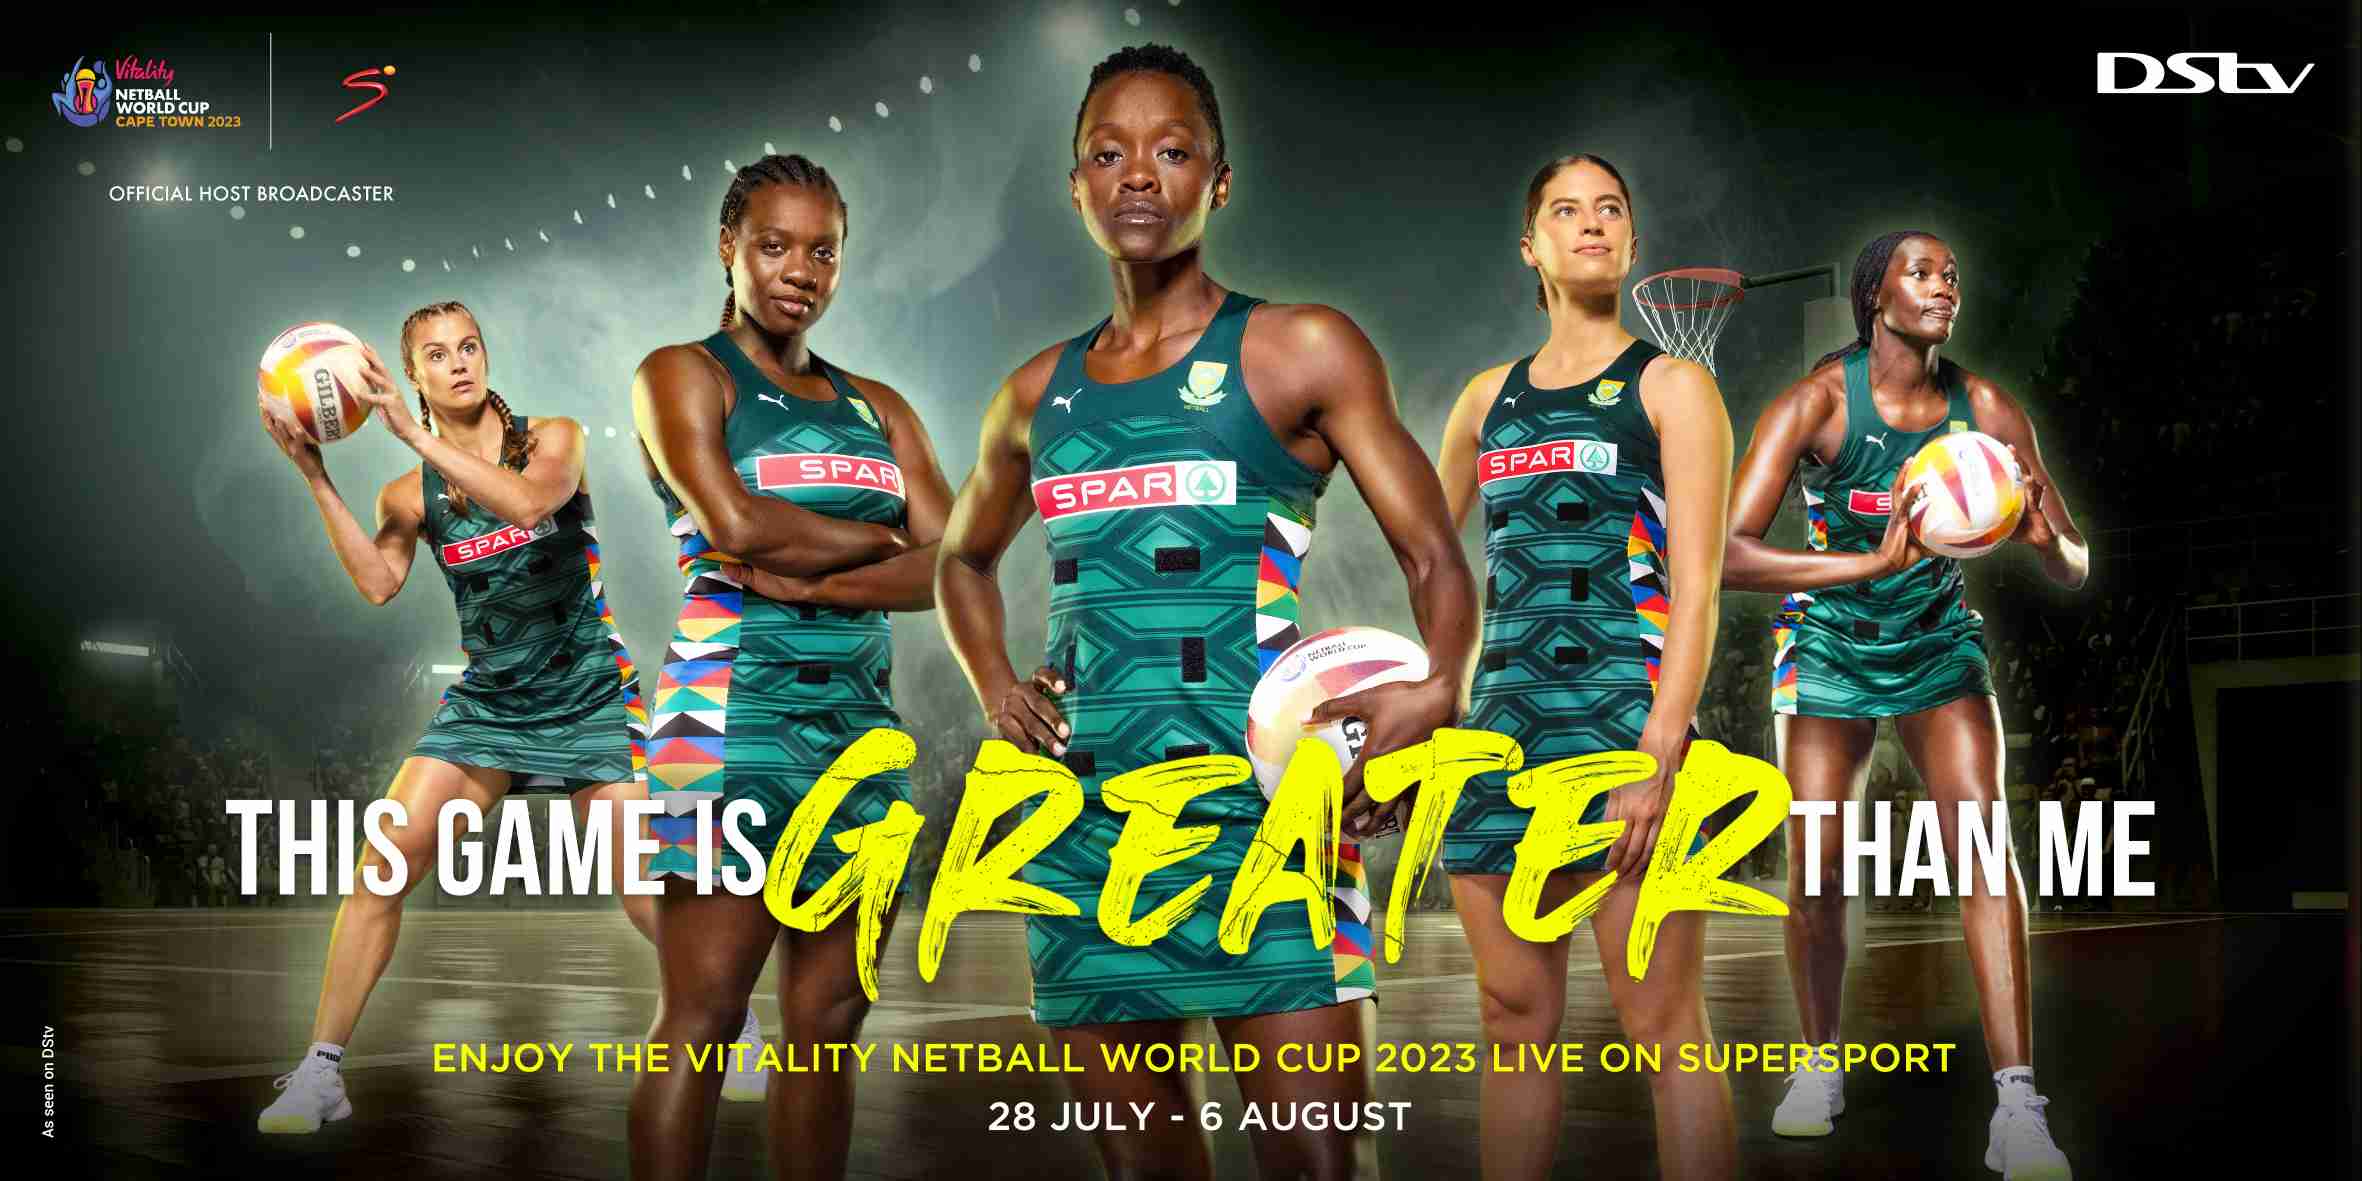 DStv Is Here for Her: The 2023 Netball World Cup is coming to your home